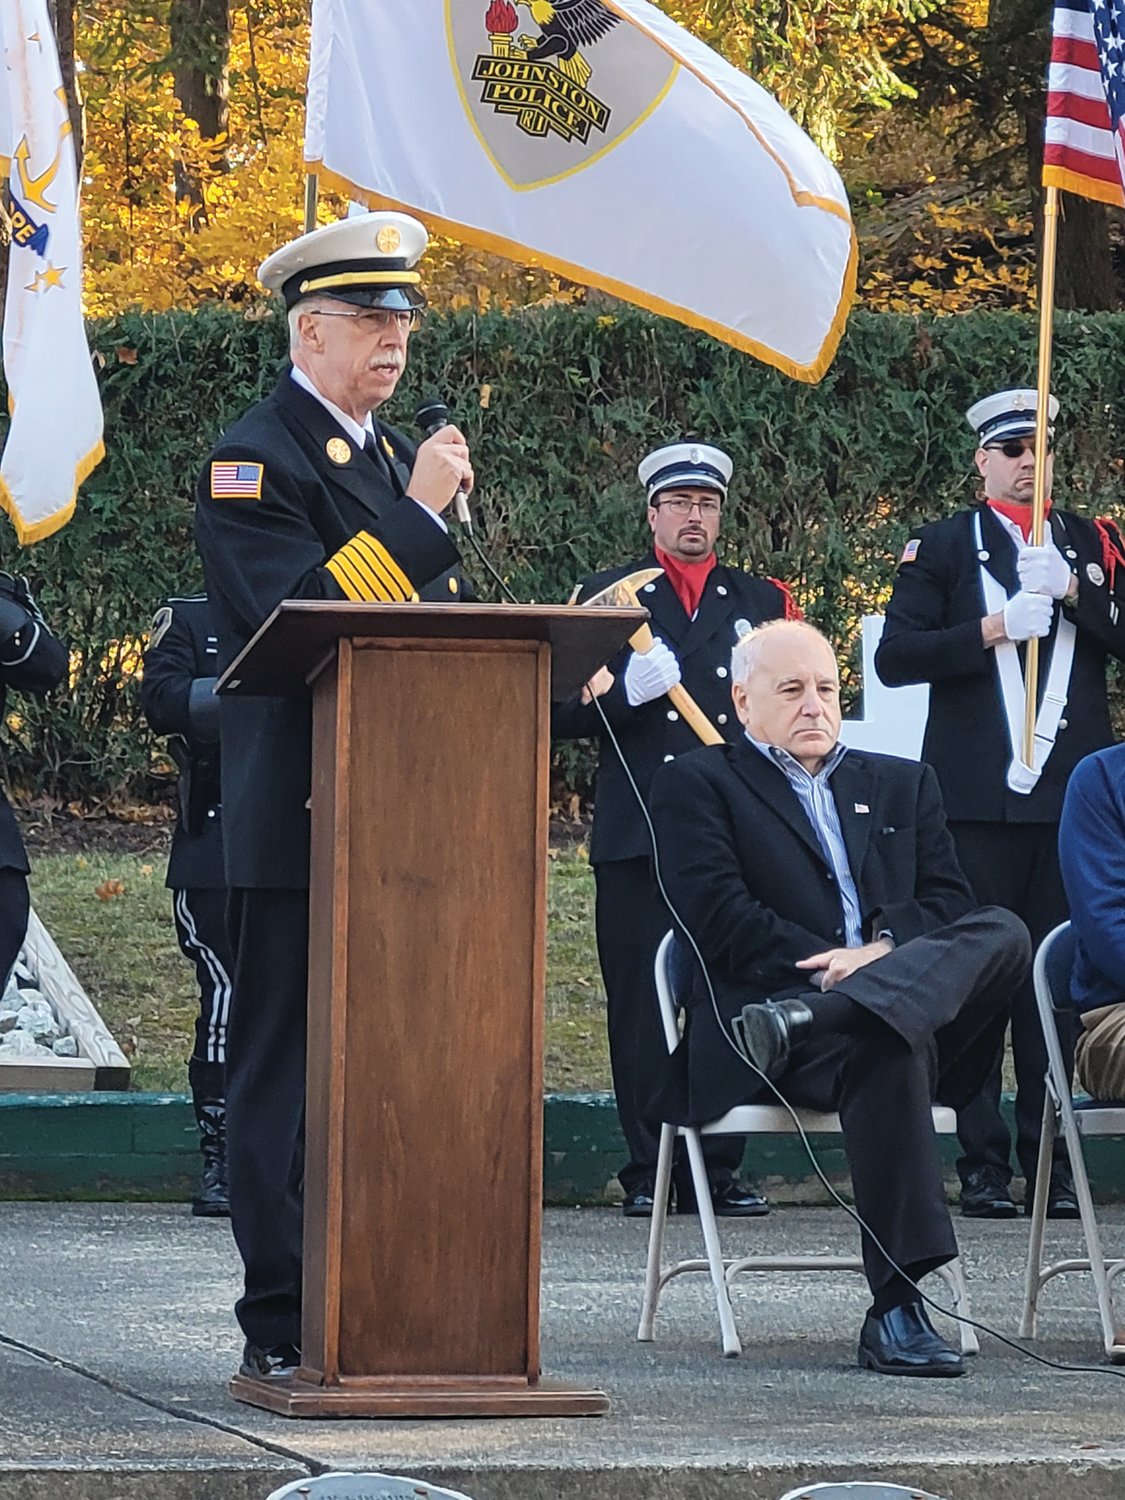 HISTORY LESSON: Johnston Fire Chief Peter J. Lamb explained the significance of the Maltese Cross, a medieval symbol often displayed on firefighters’ uniforms, and on the Johnston War Memorial Park’s newest monument.